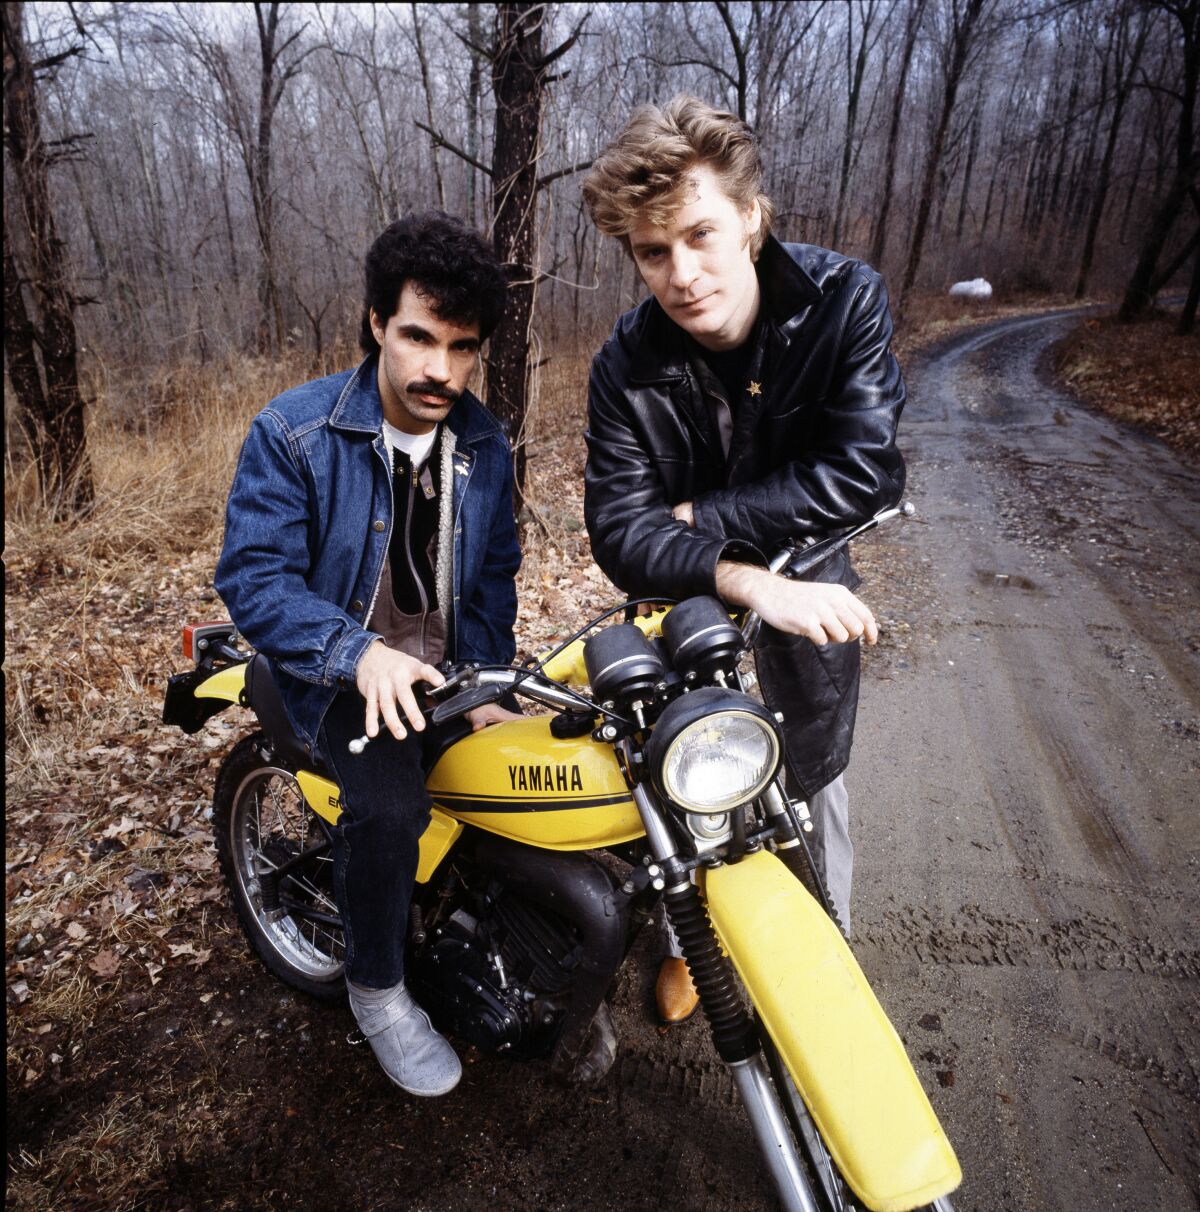 Two men standing in the woods leaning on a yellow motorcycle